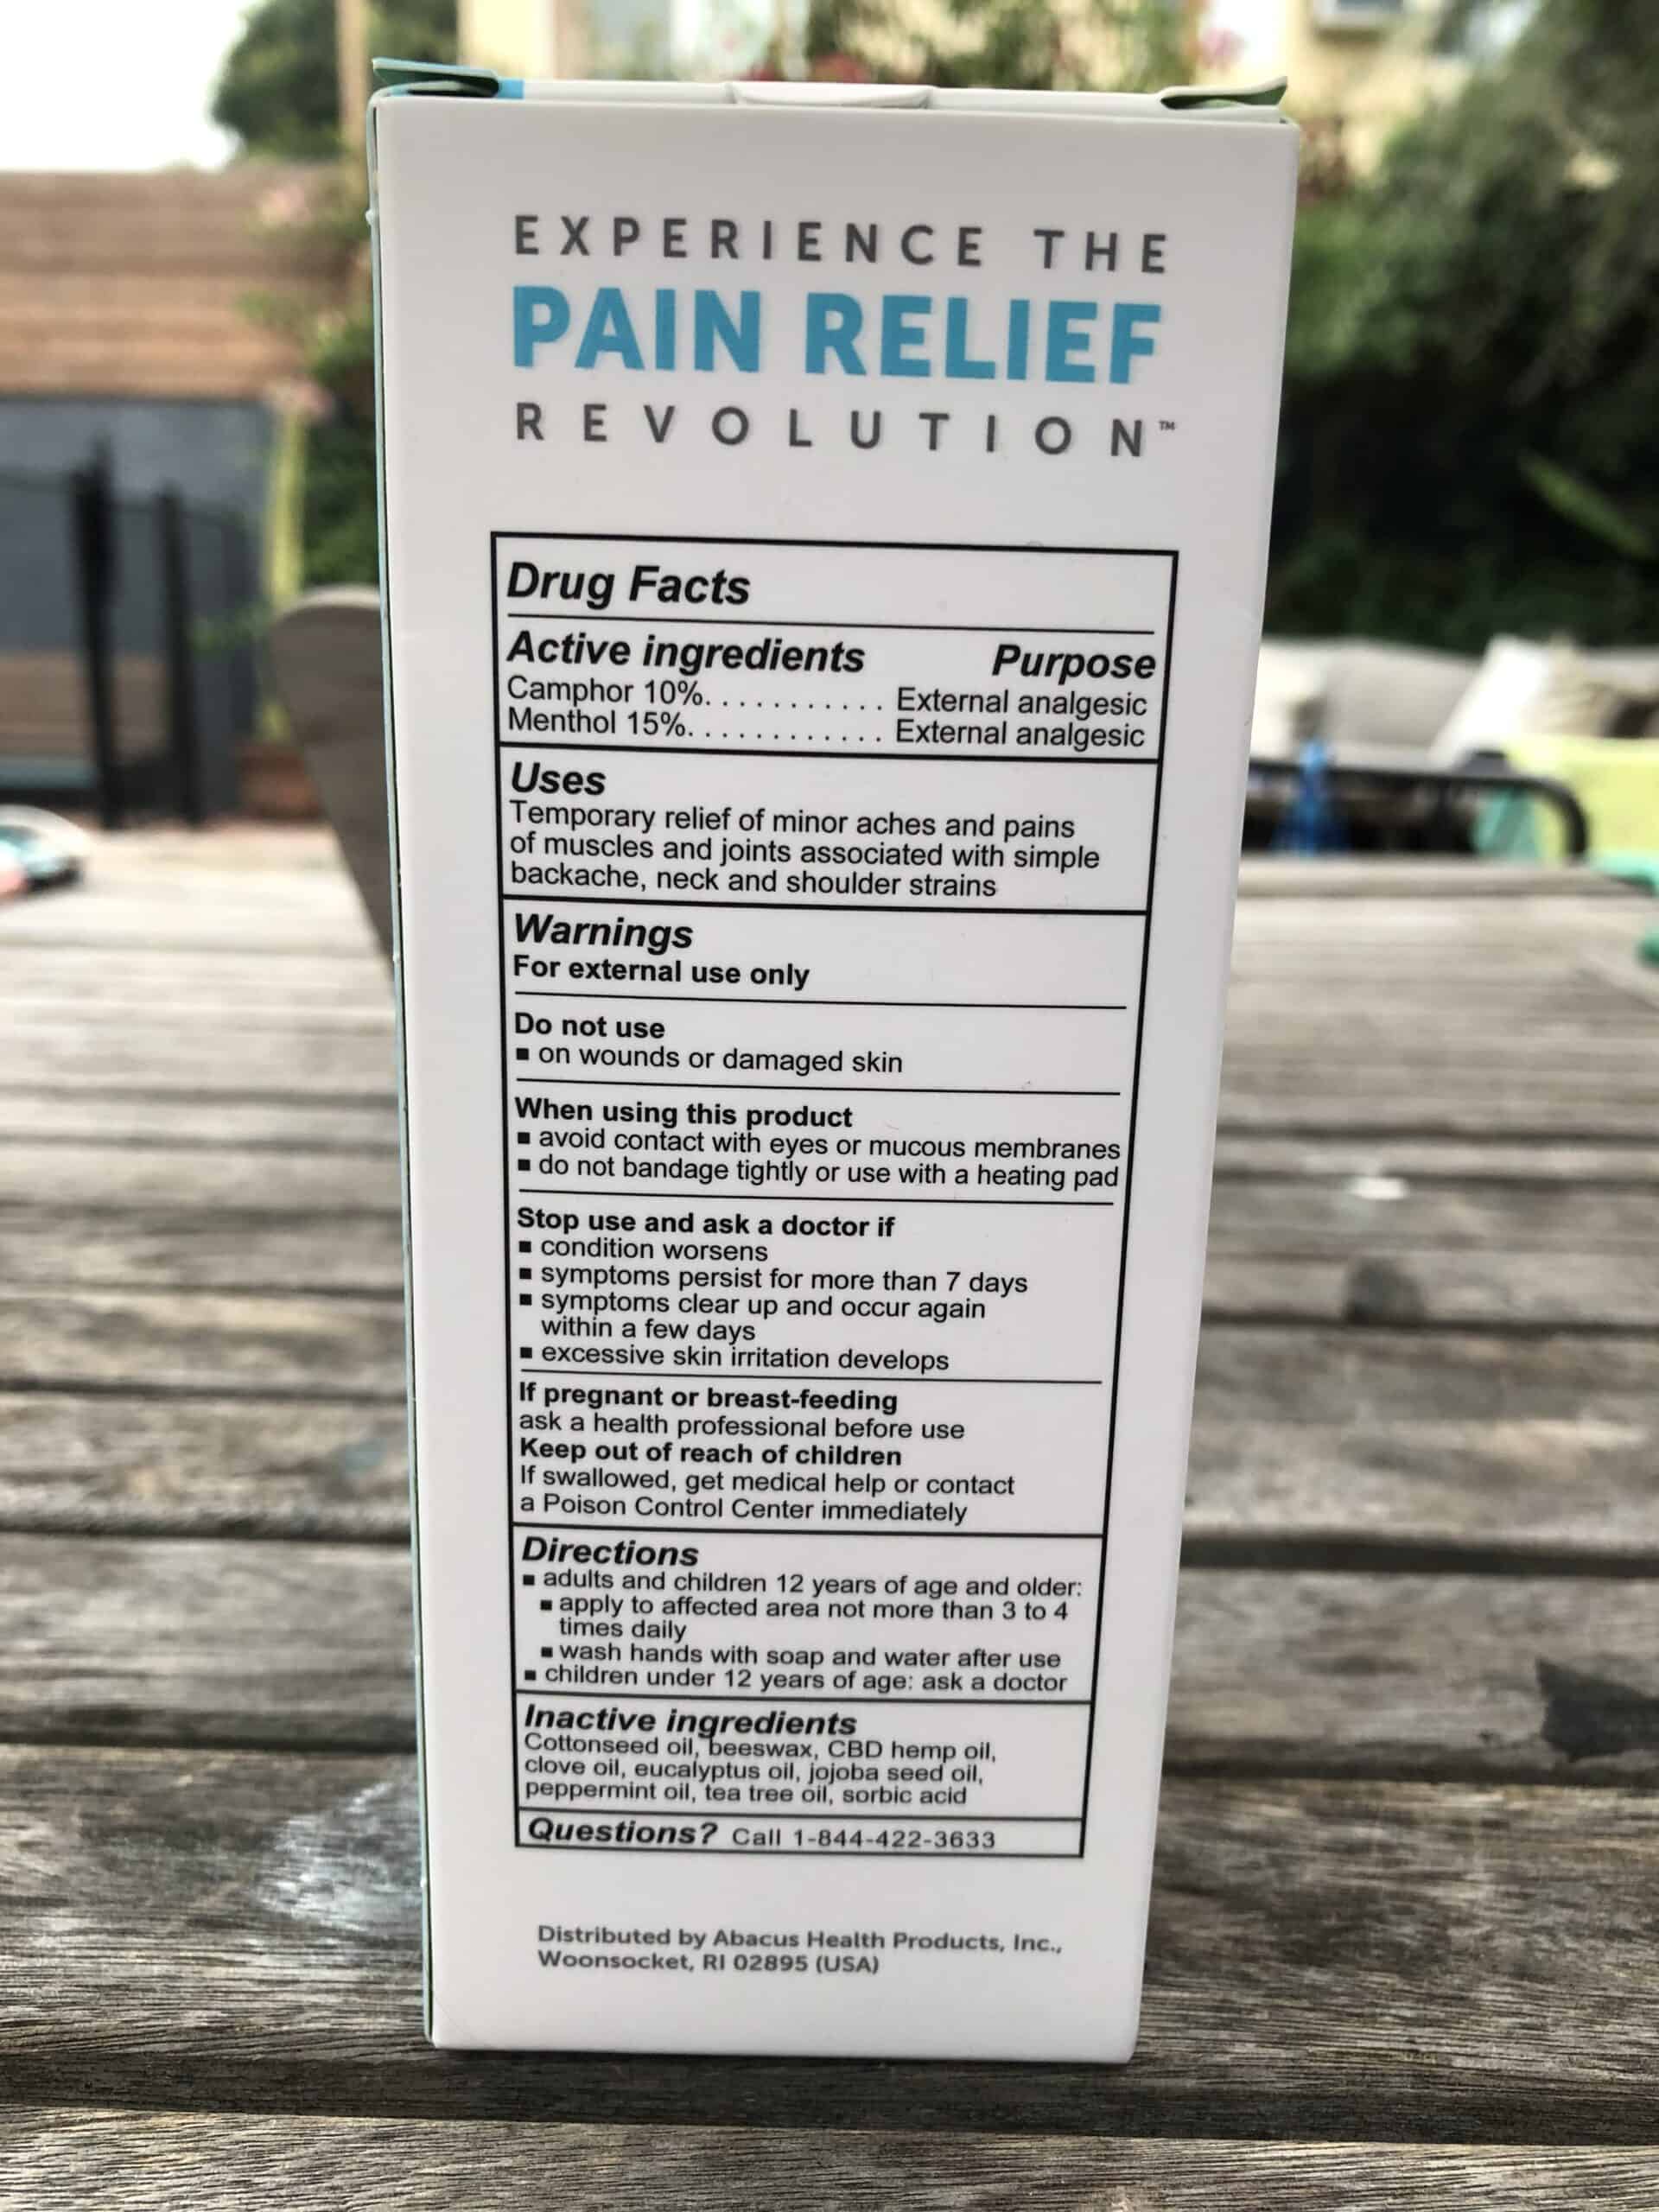 cbdmedic back and neck pain relief ointment review save on cannabis specifications